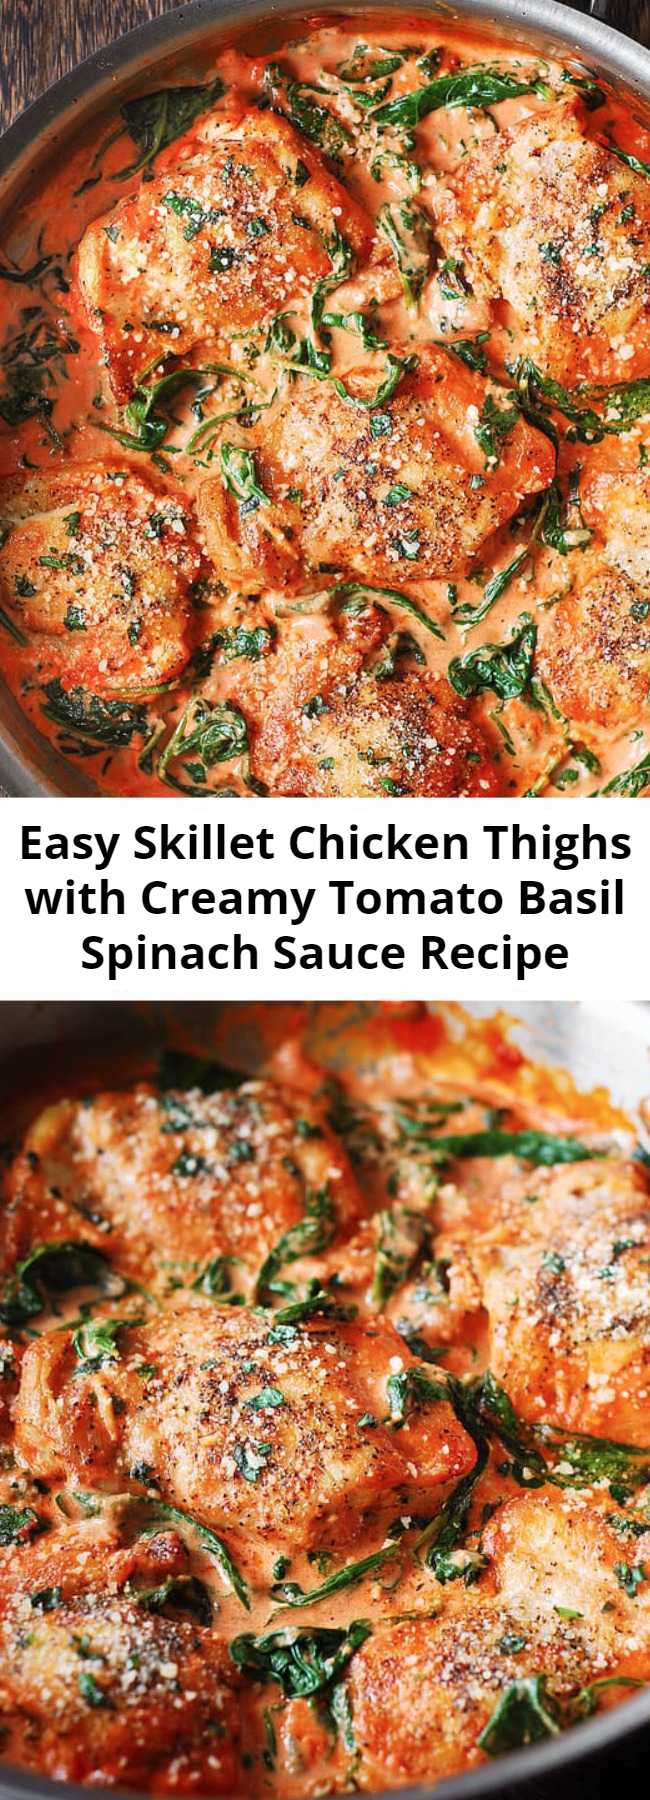 Easy Skillet Chicken Thighs with Creamy Tomato Basil Spinach Sauce Recipe - The whole recipe takes 30 minutes from start to finish! Boneless skinless chicken thighs are seared to perfection and served in a creamy tomato basil sauce with spinach, sprinkled with grated Parmesan cheese. Easy dinner that a whole family will love! #chicken #chickenthighs #chickendinner #tomatobasil #tomatobasilsauce #spinachsauce #spinach #basil #glutenfree